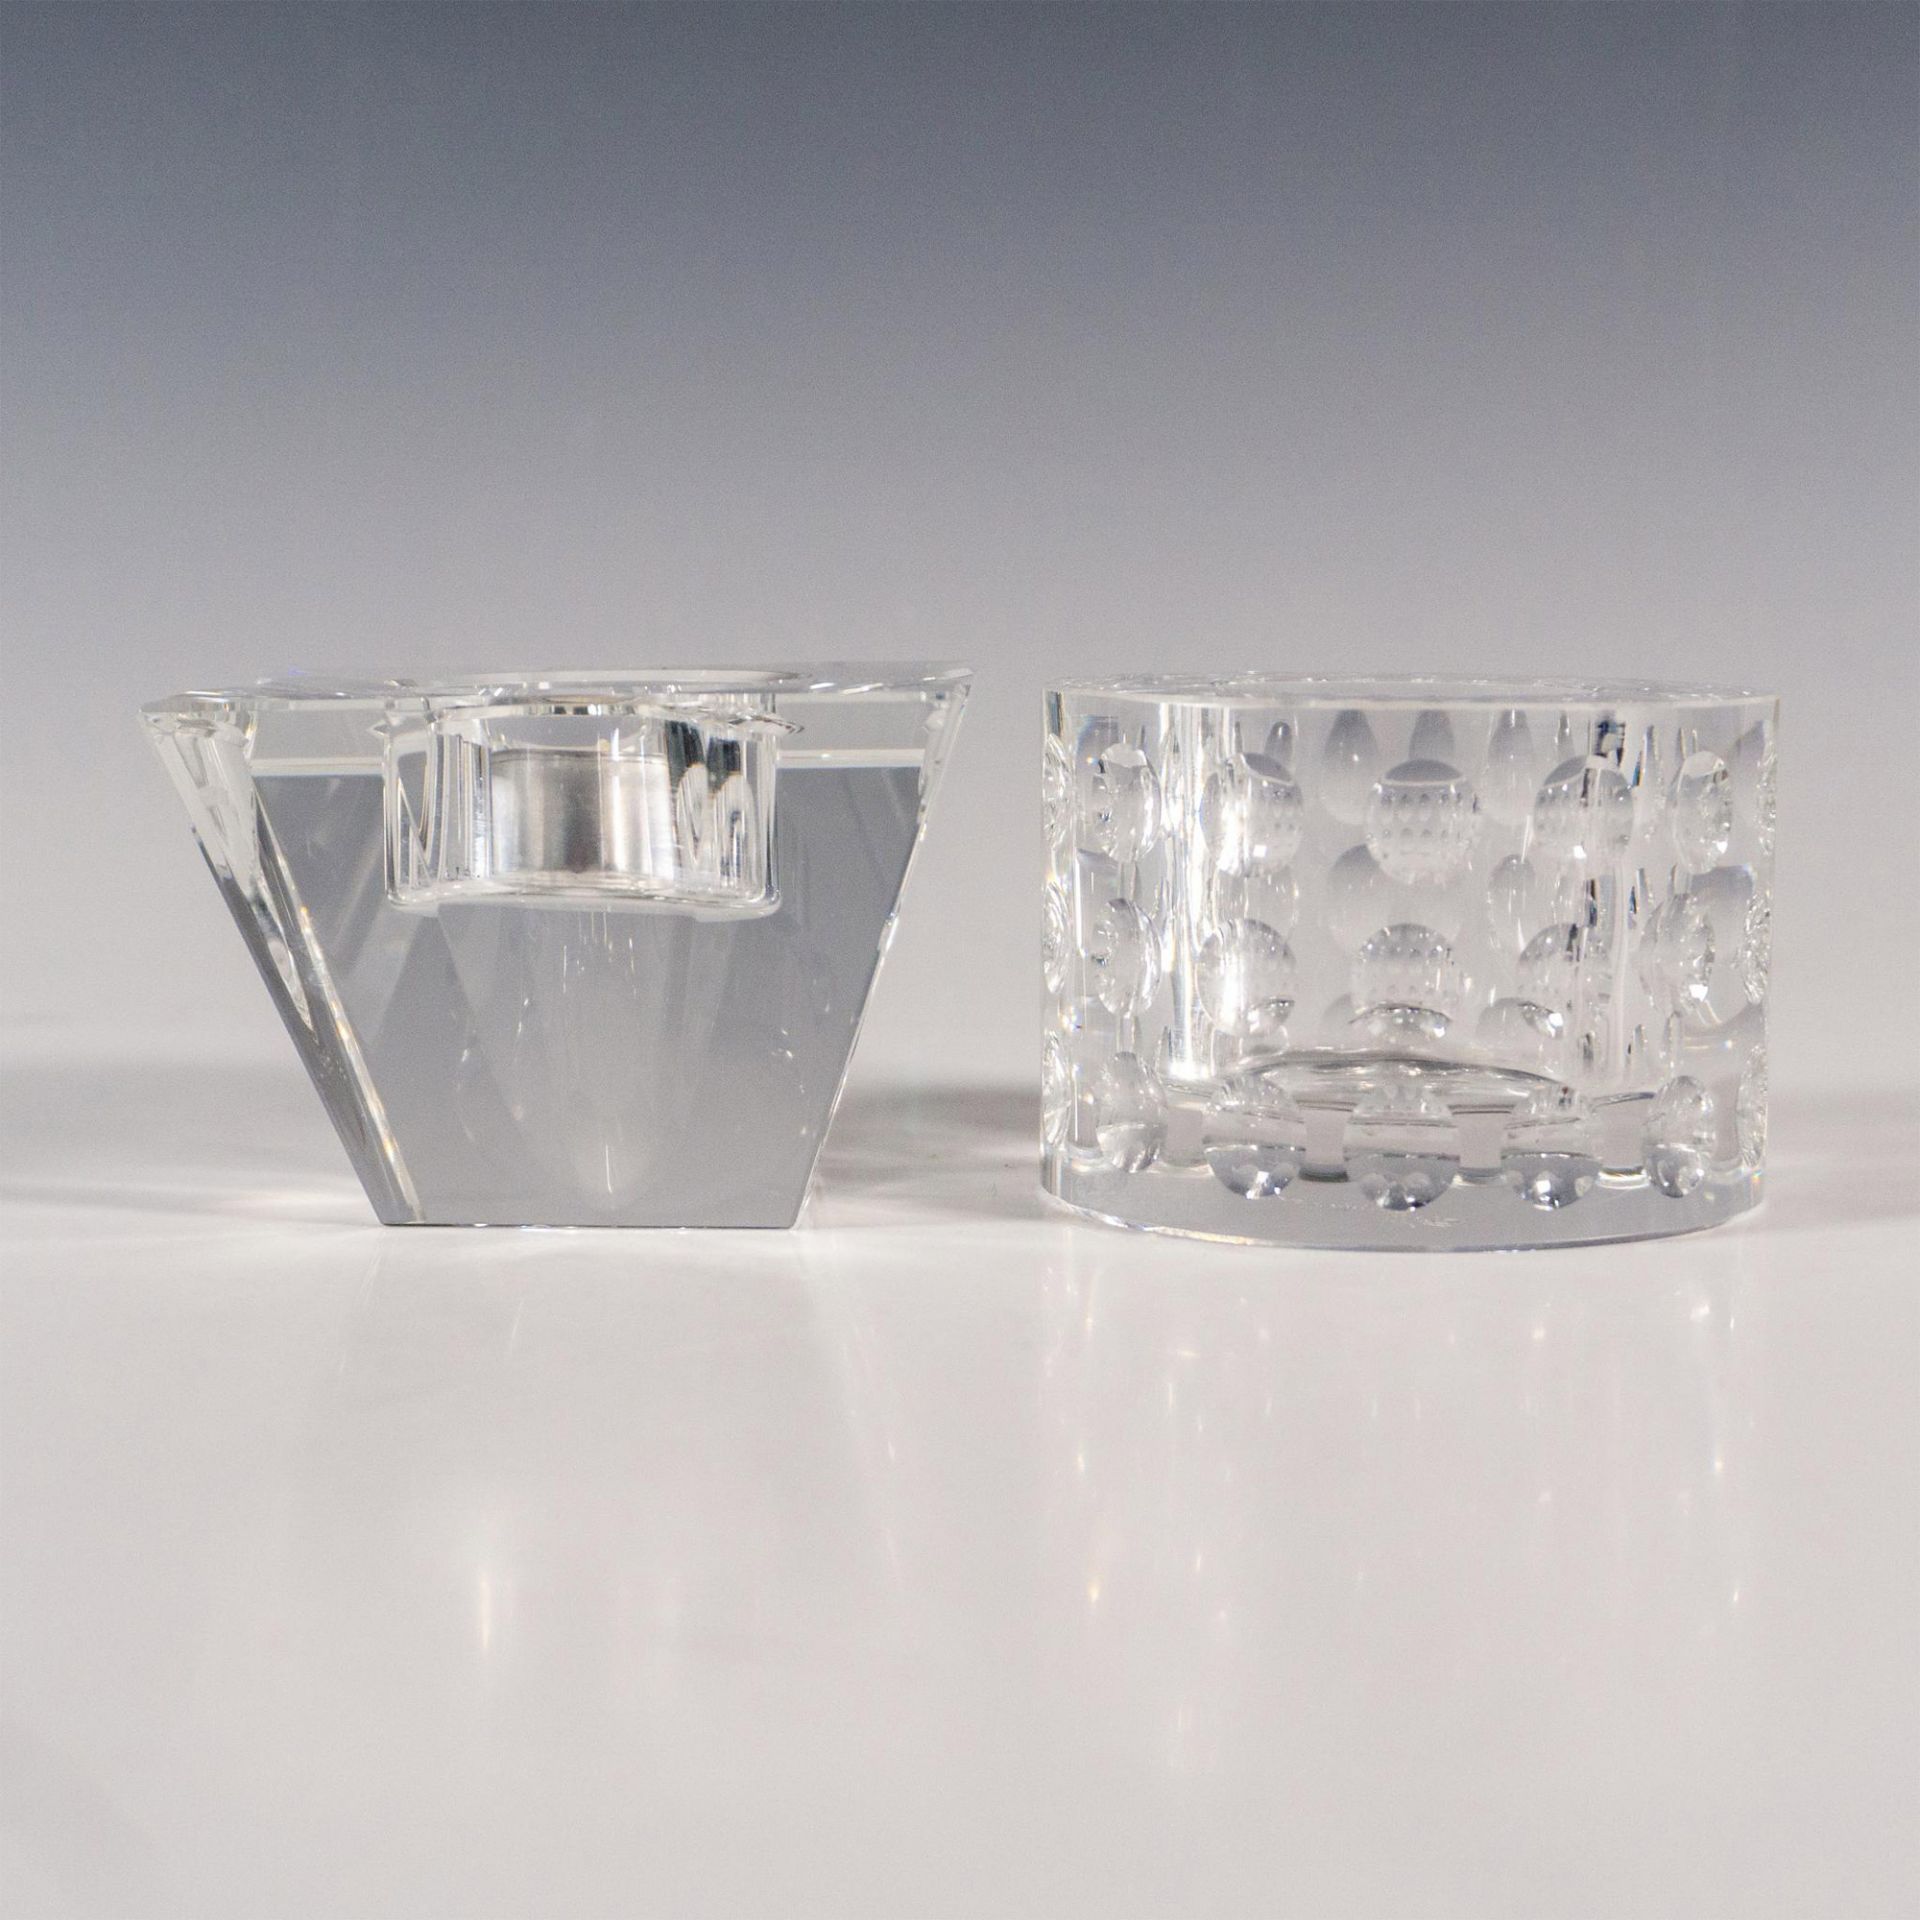 2pc Oleg Cassini Crystal Candle Holders, Bubble & Prism - Image 2 of 4